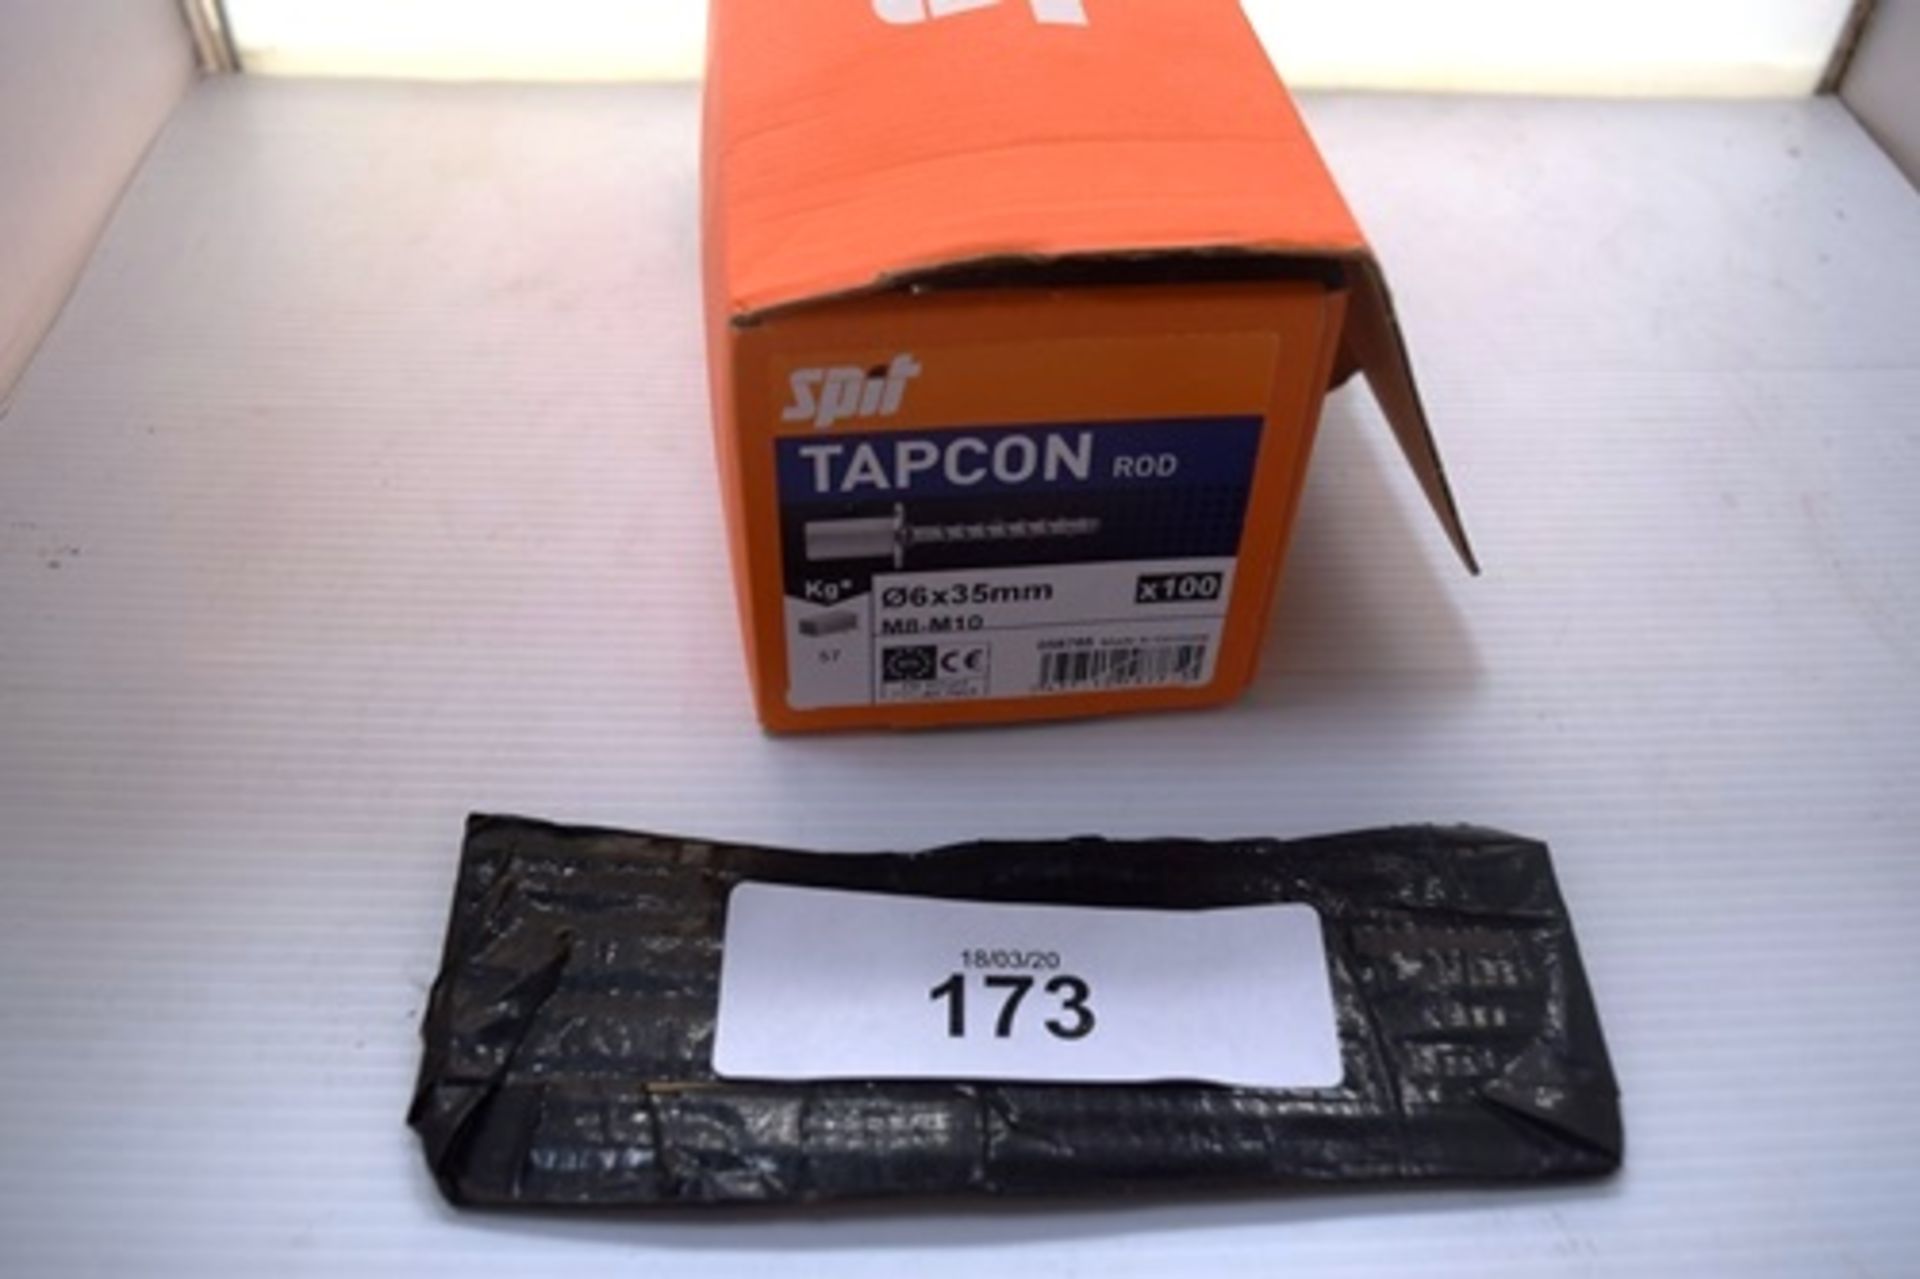 4 x boxes each containing 100 of Spit Tapcon Rod06 x 35mm nails, code 058785 - New in box (GS21)